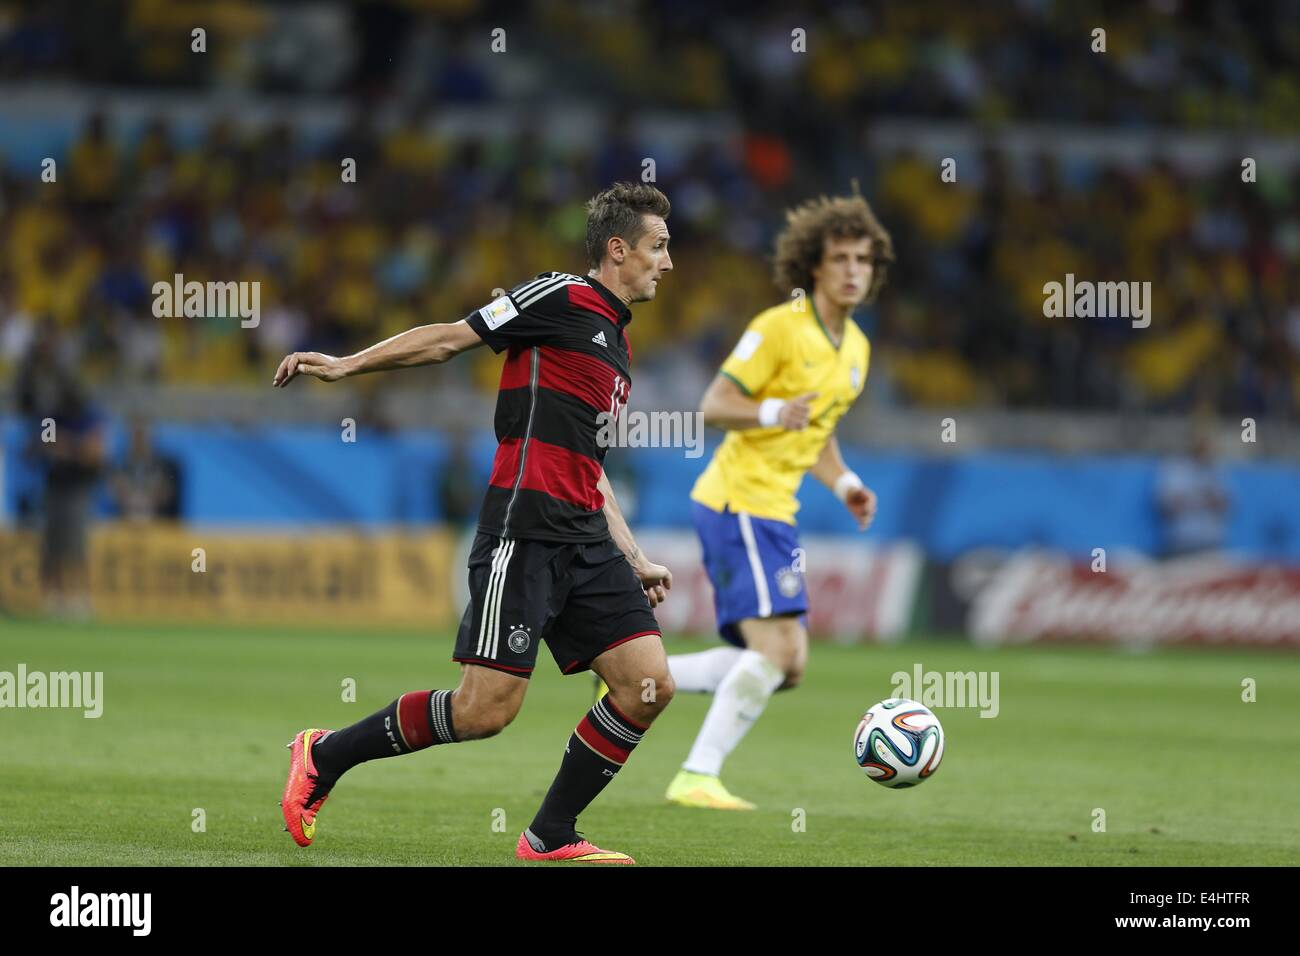 Miroslav Klose (GER), JULY 8, 2014 - Football / Soccer : FIFA World Cup Brazil 2014 Semi Final match  between Brazil and Germany at the Estadio Mineirao in Belo Horizonte, Brazil. (Photo by AFLO) [3604] Stock Photo